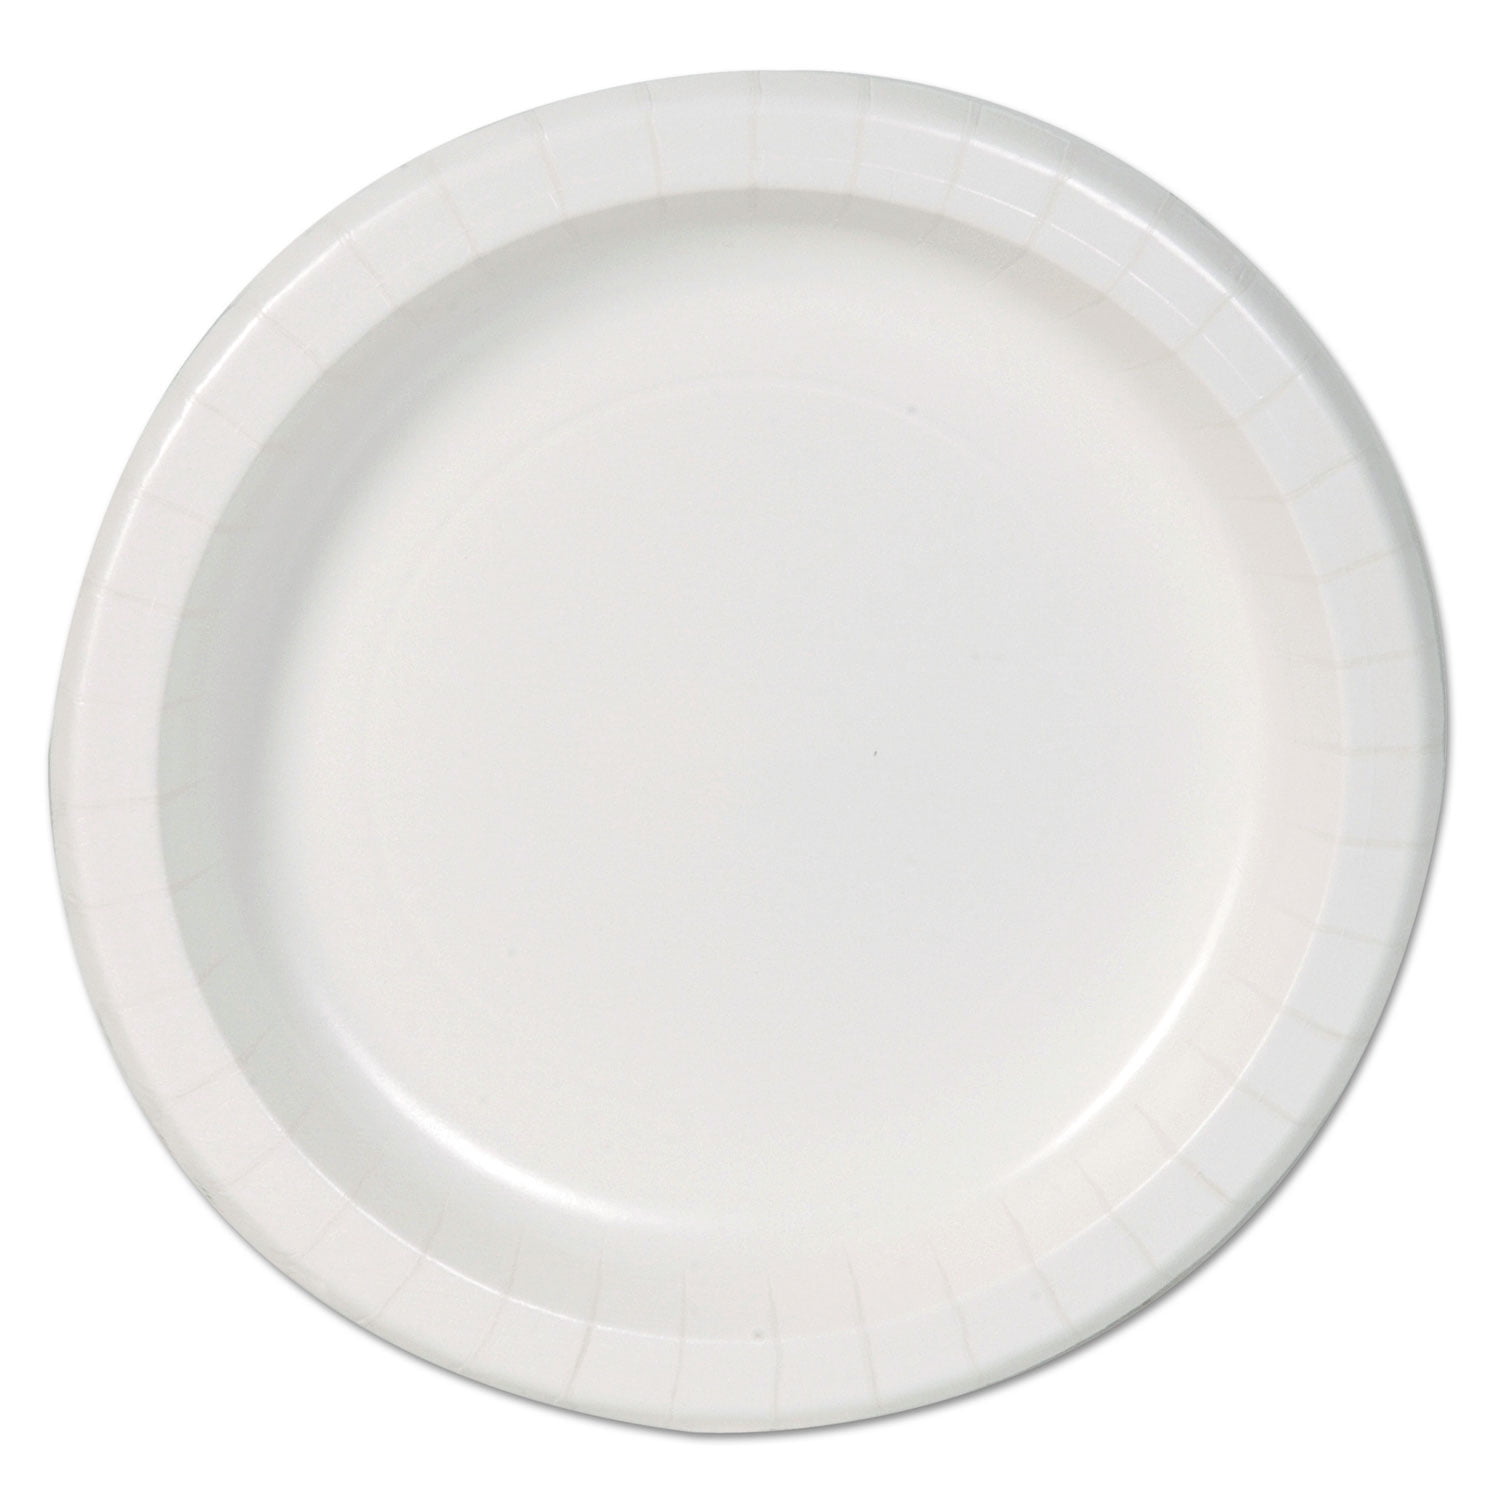 [600 COUNT] White Heavy Duty Disposable Paper Plates 9-Inch by EcoQuality -  Perfect for Parties, BBQ, Catering, Office, Event's, Pizza, Restaurants